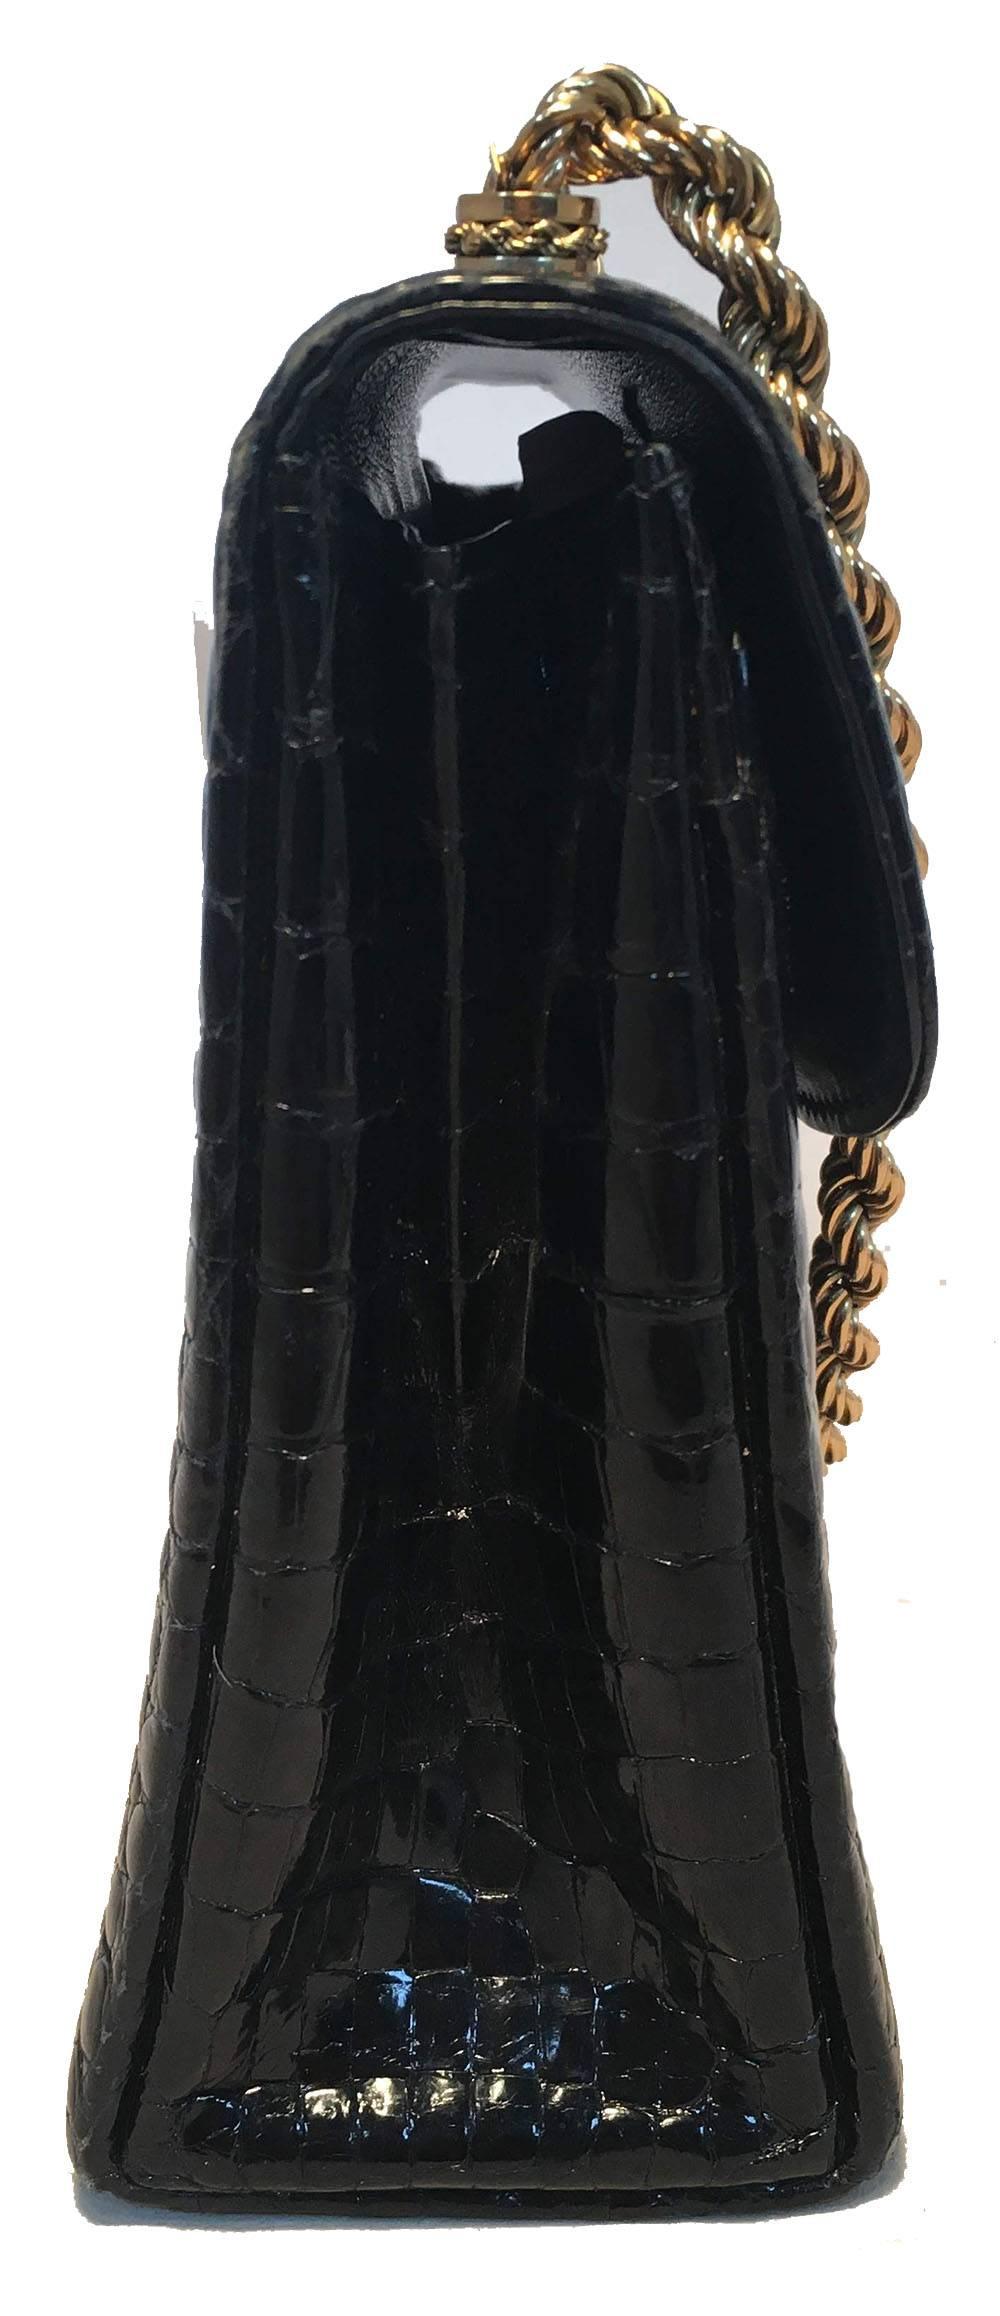 FABULOUS Gucci Vintage Black Alligator Handbag in excellent condition.  Black alligator exterior trimmed with gold chain handle and front folding latch closure. Single flap style closure opens to a black leather lined interior that holds 2 slit and